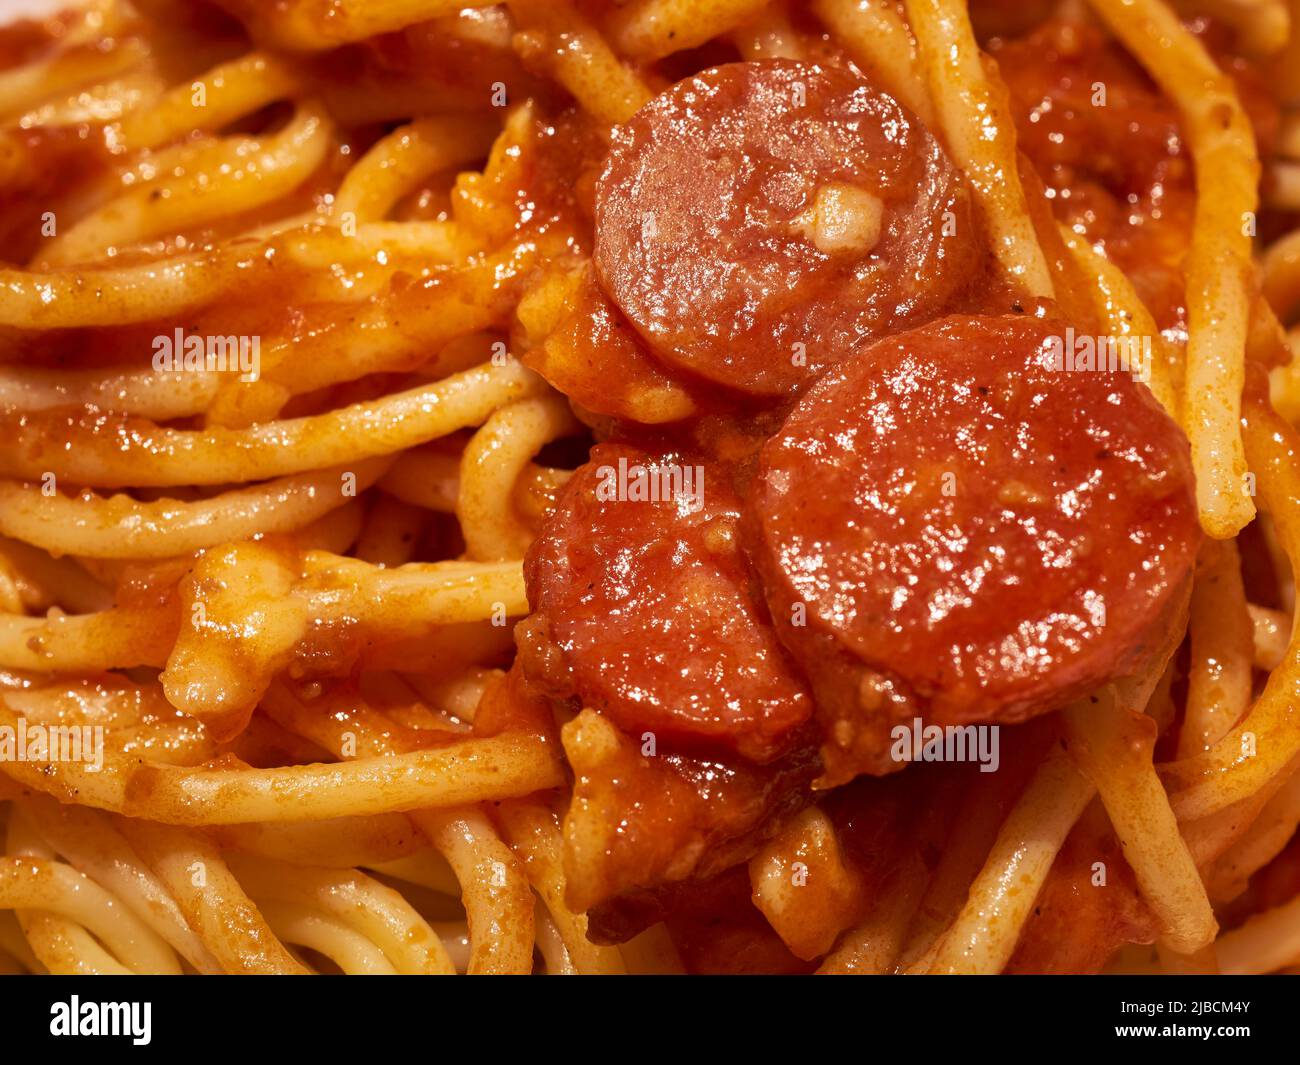 Philapine style sphaghetti with hot dog slices served at a Jollibee fast food restaurant in Queens, NY Stock Photo